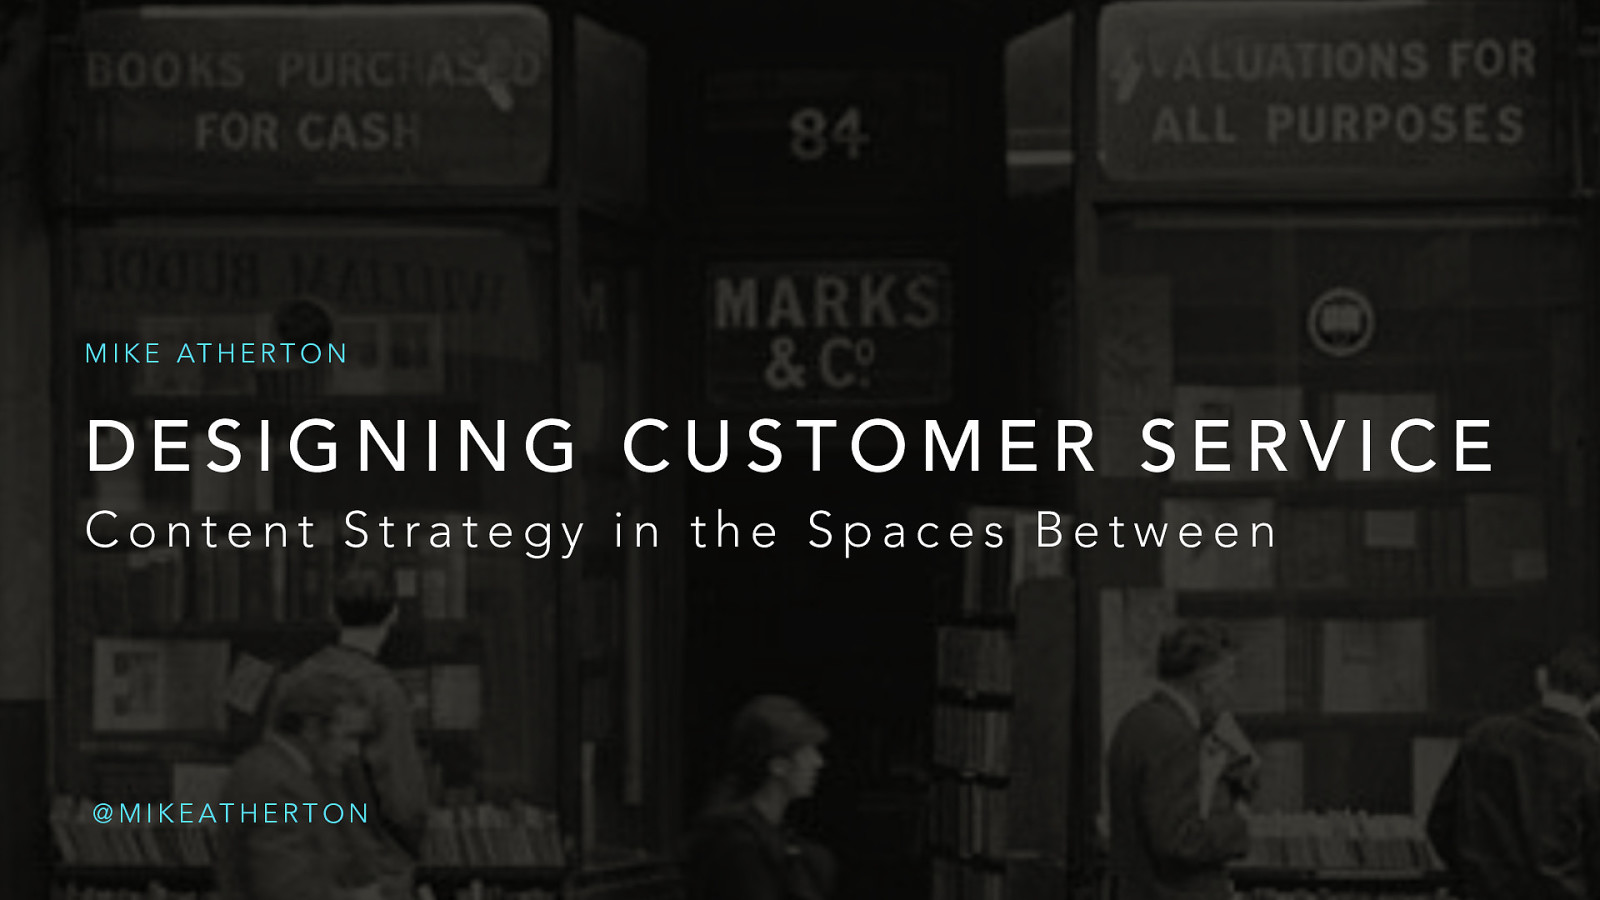 Content Strategy in the Spaces Between